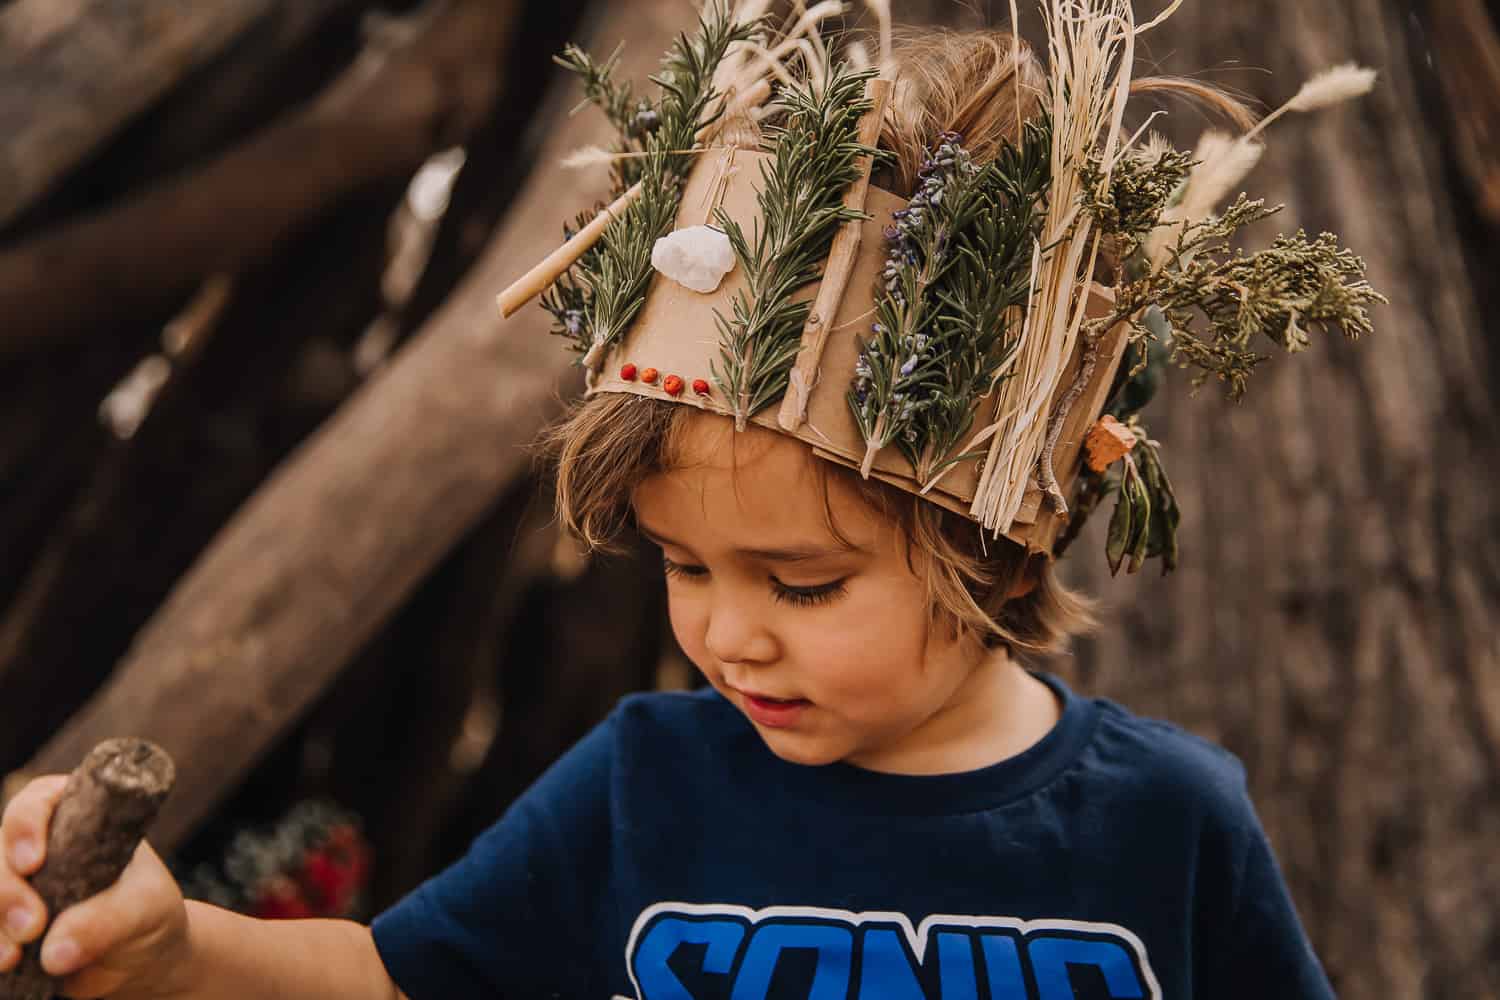 How to make DIY nature crowns for kids - 3 tutorials